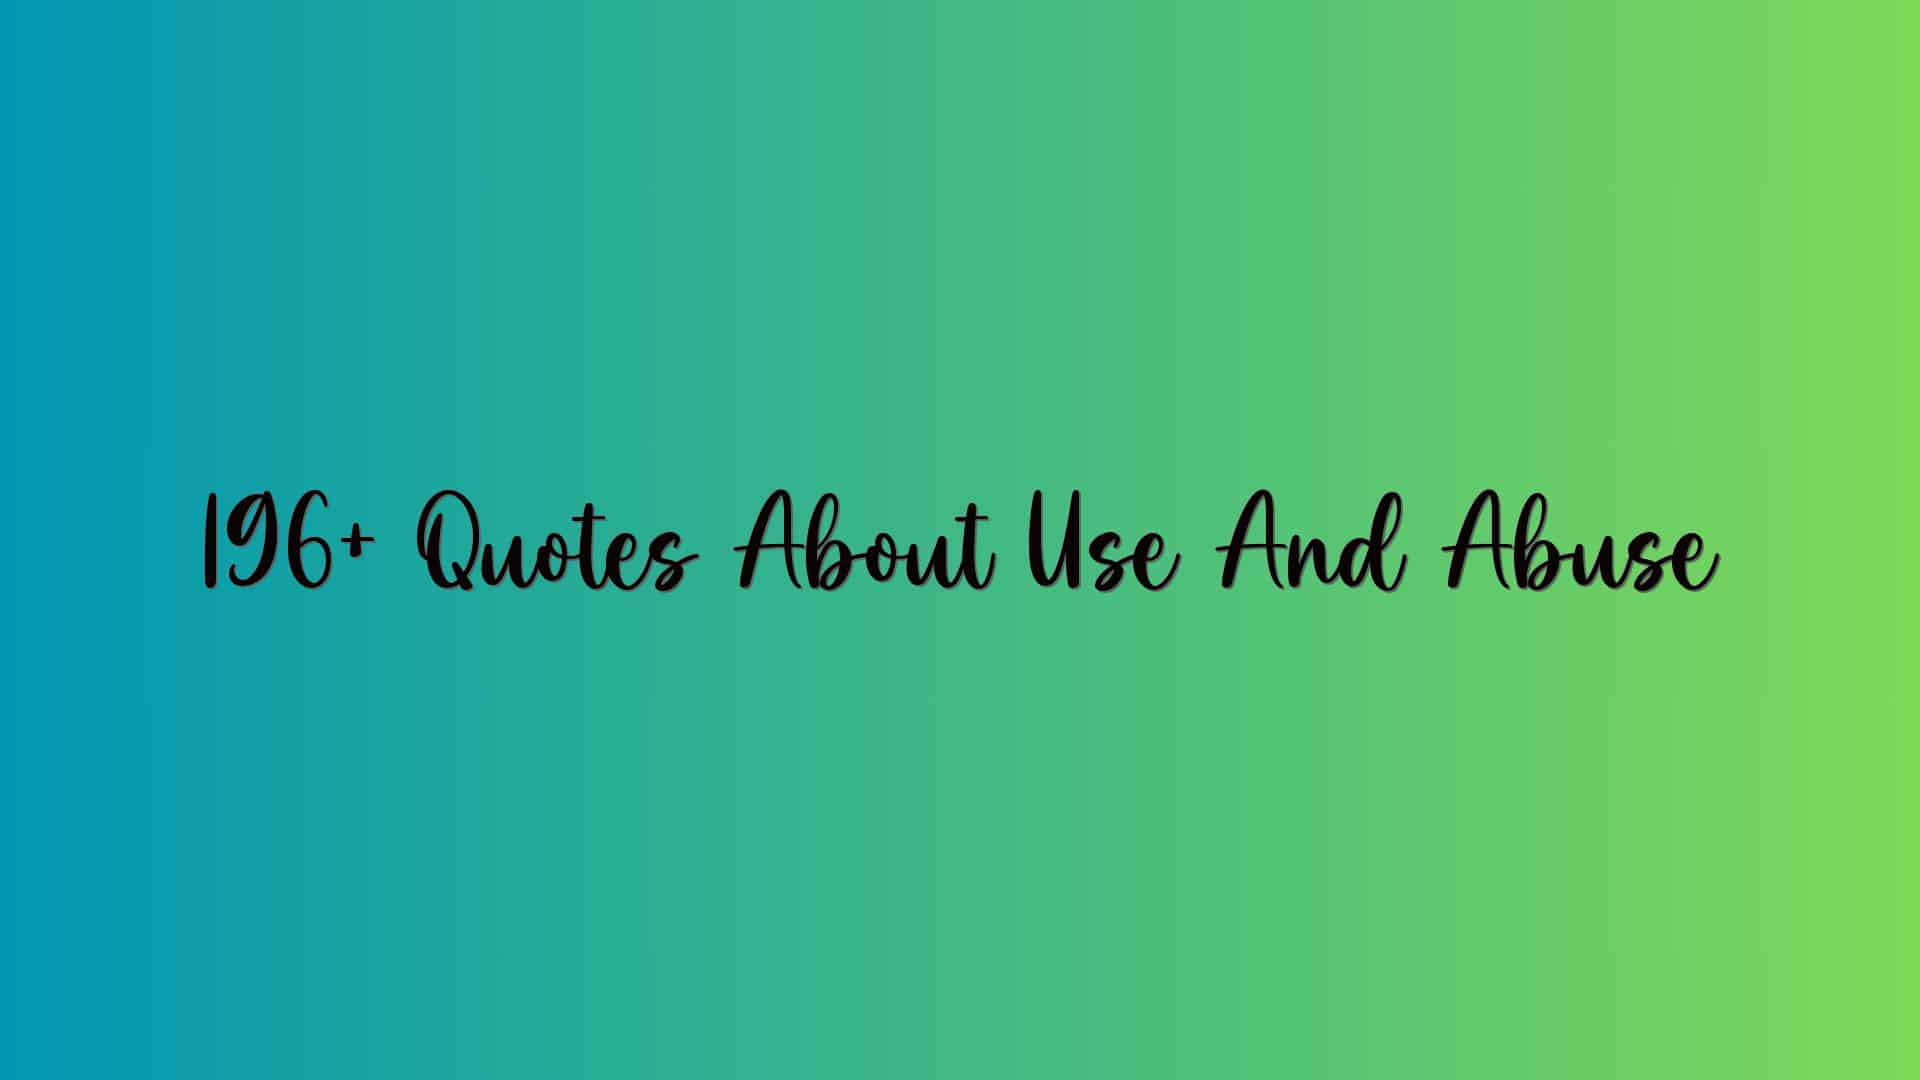 196+ Quotes About Use And Abuse